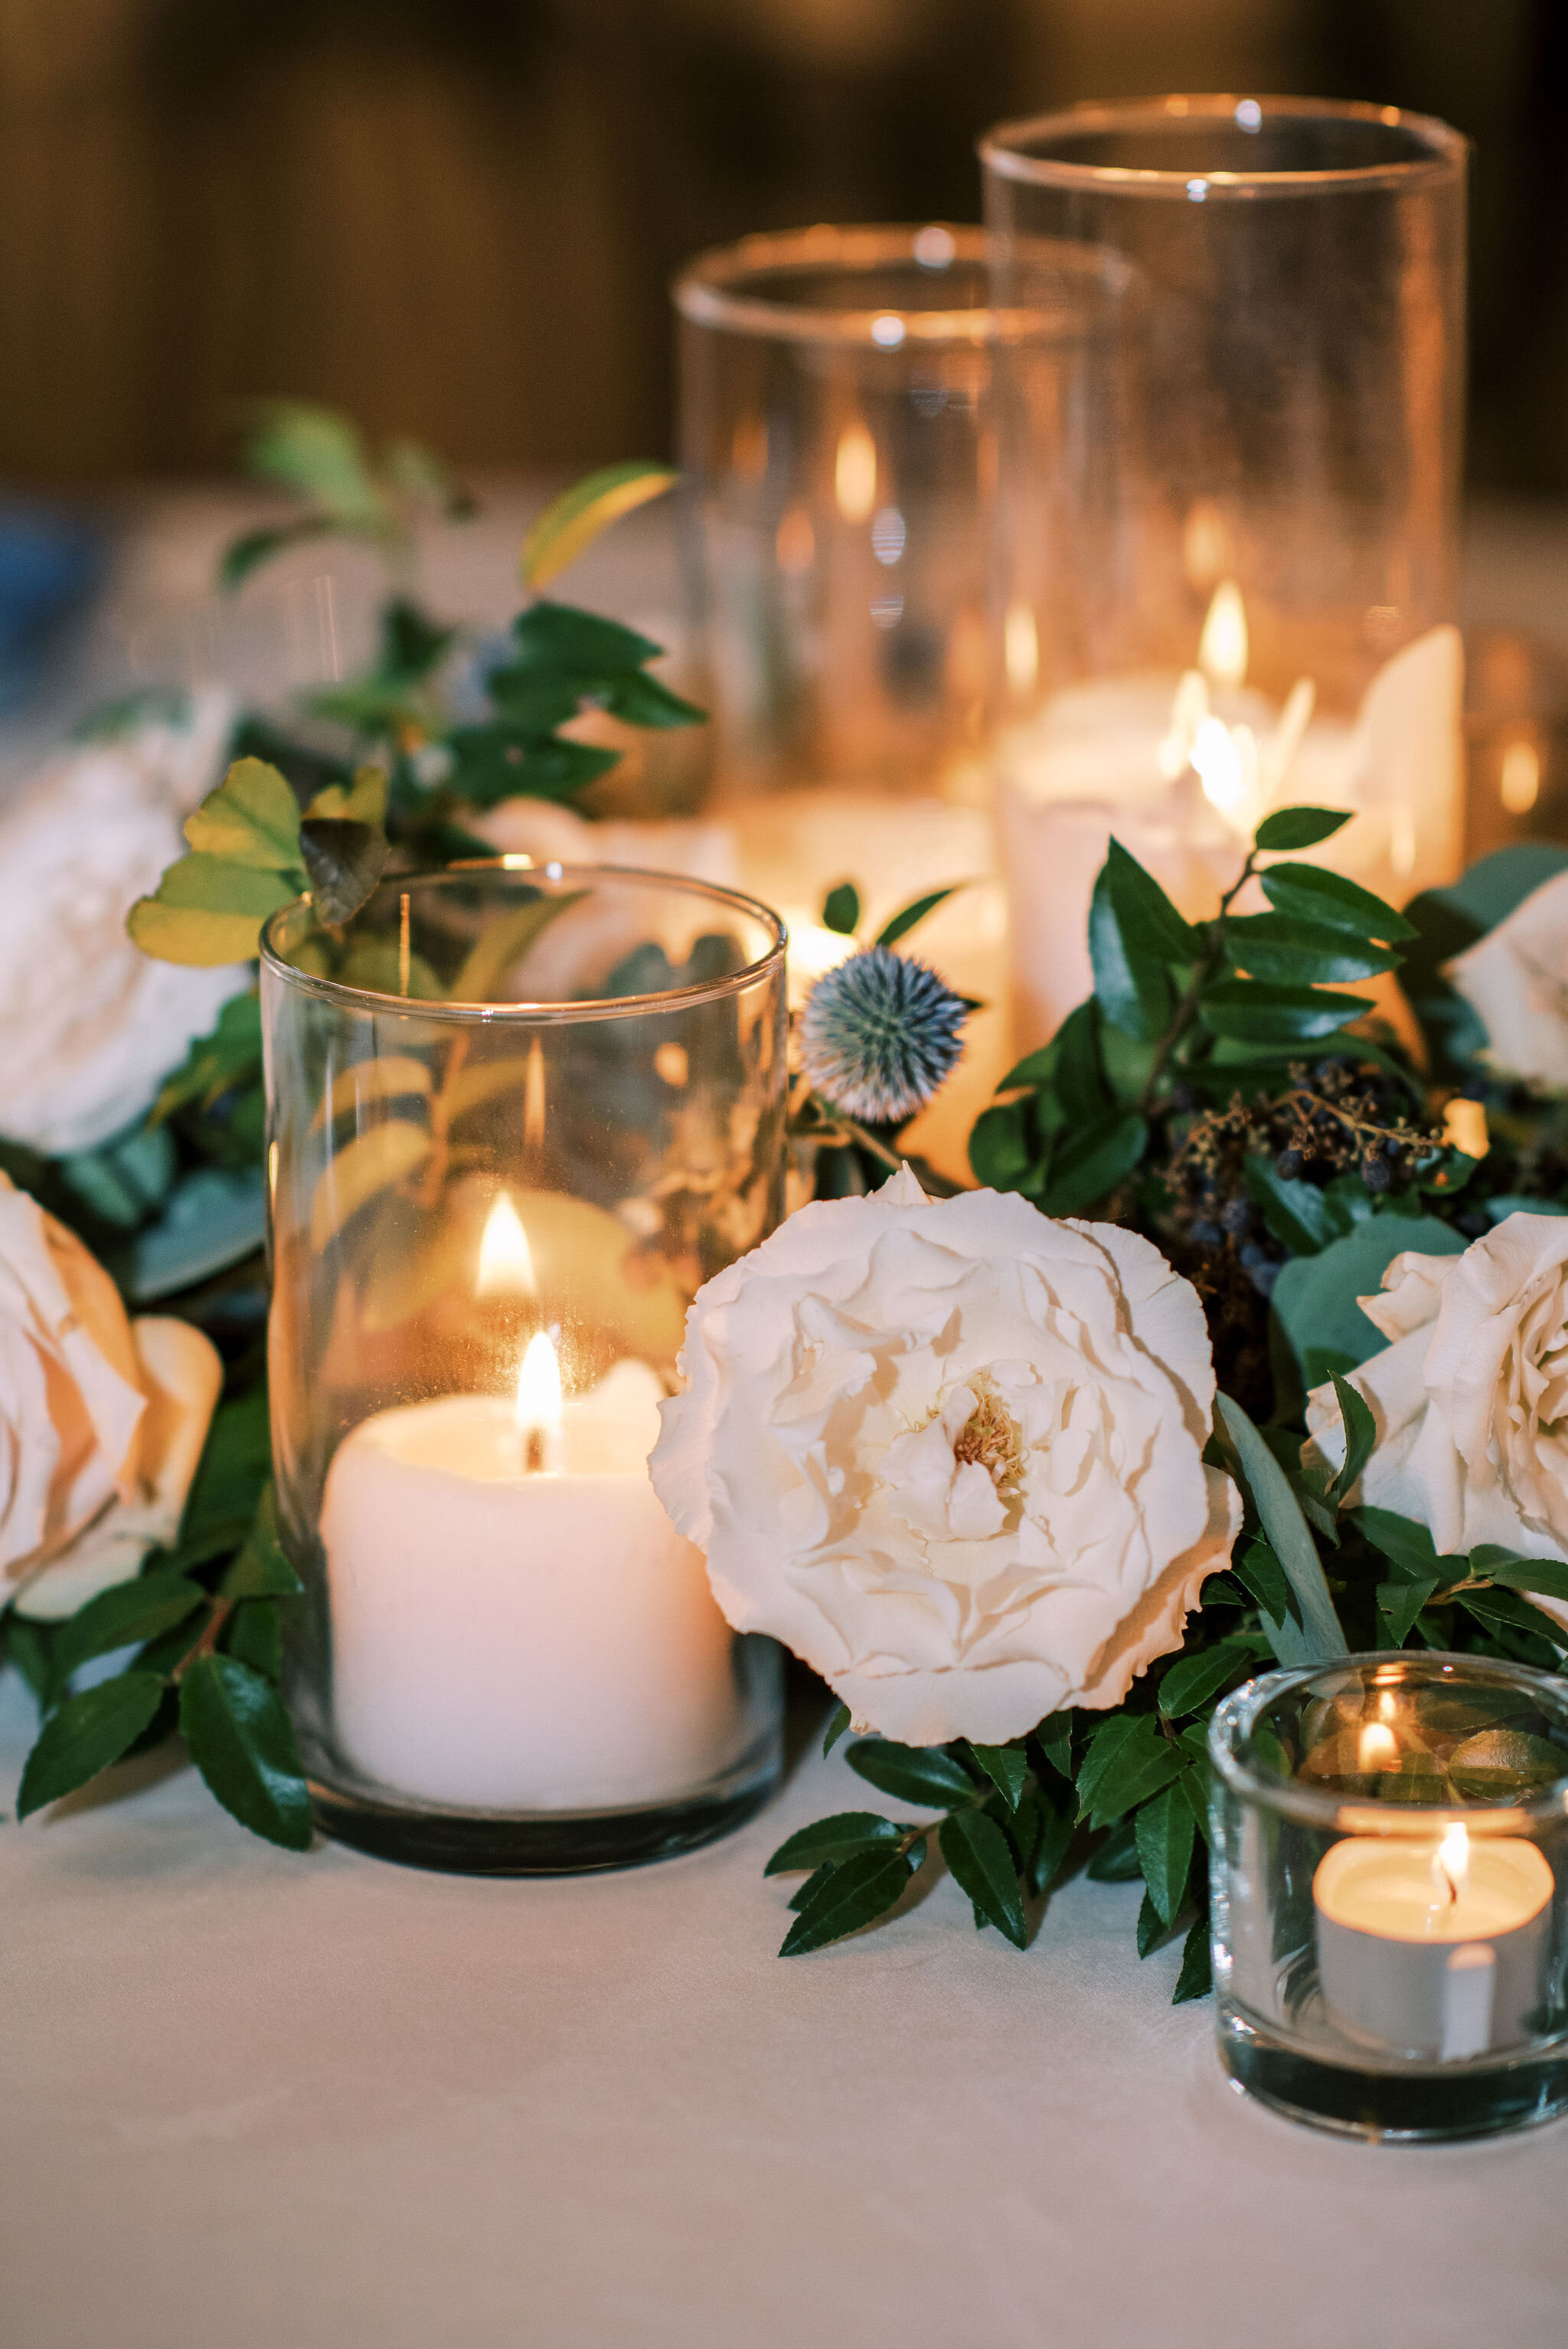 This wedding featured lush table garlands filled with blooms of blush and white garden roses, blue globe thistle, privet berry, seeded eucalyptus and lush greenery. Twinkly pillar candles and votives were scattered throughout the garland. Designed b…